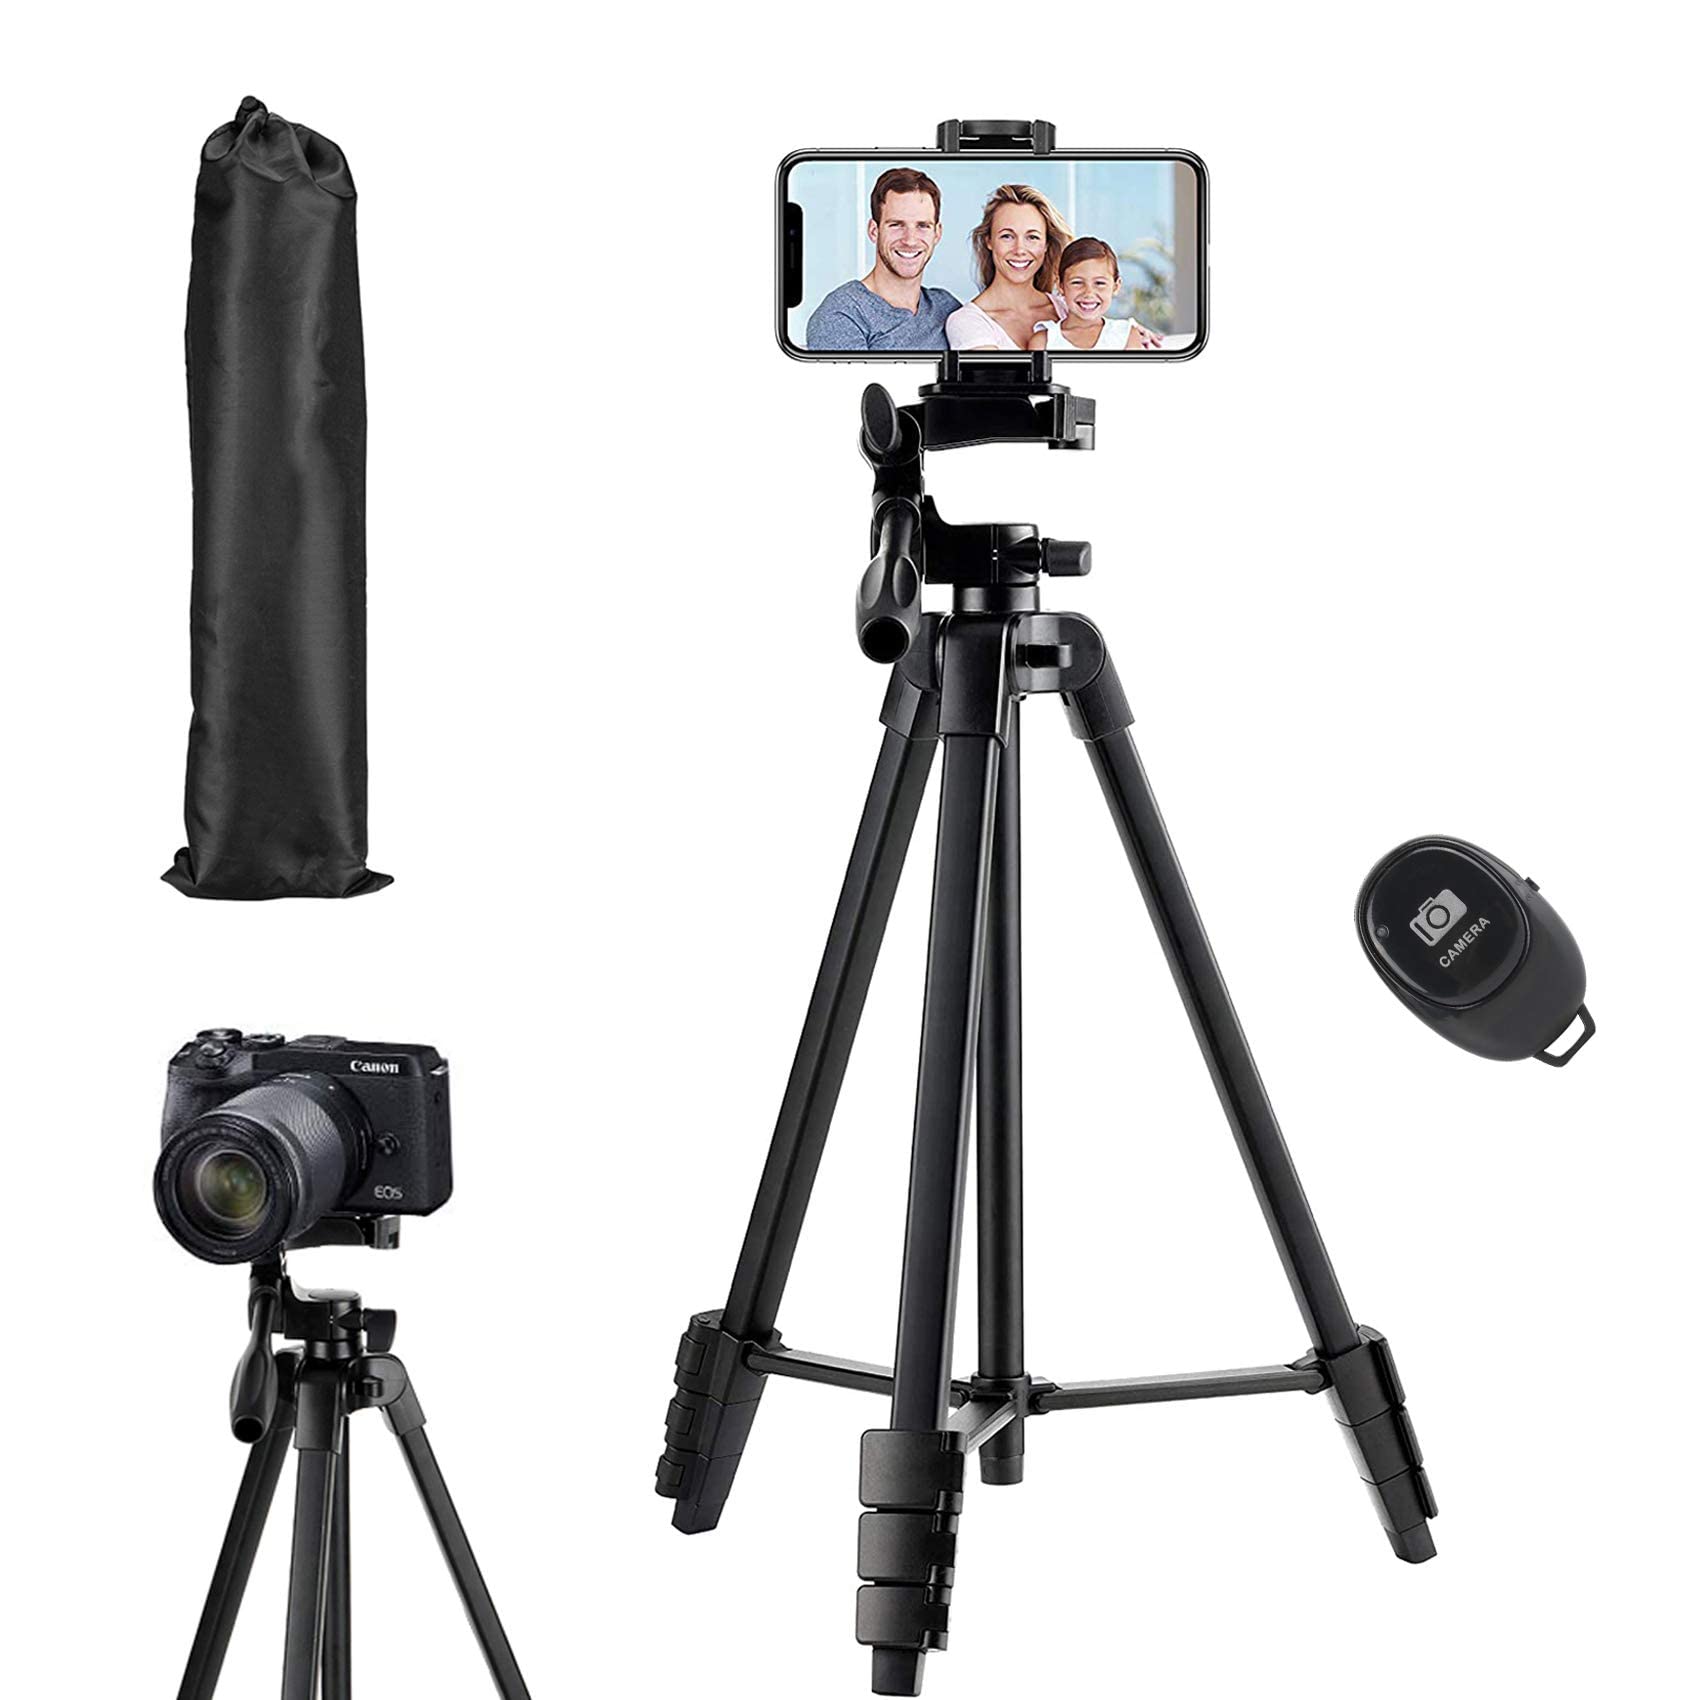 Eocean Tripod Flexible, 136cm Extendable Mobile Tripod Stand with Wireless Remote and Clip, Universal Aluminum Alloy Tripod for Video Recording, Selfie, Travel Camera Tripod Lightweight